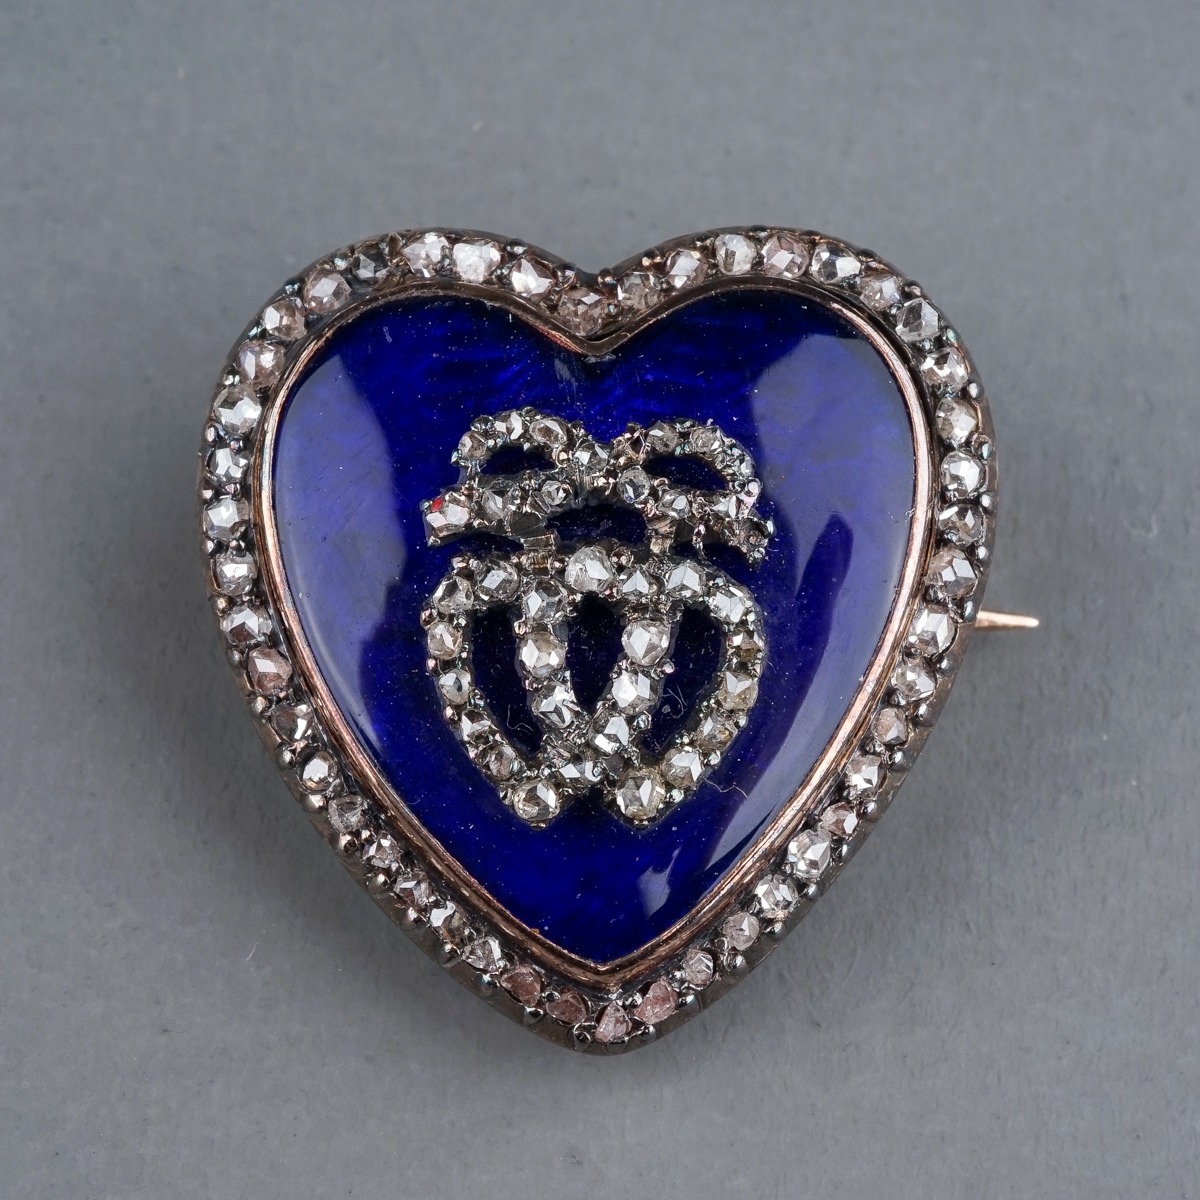 A late 19th century diamond and enamel heart shaped brooch/pendant, the blue enamel heart set with